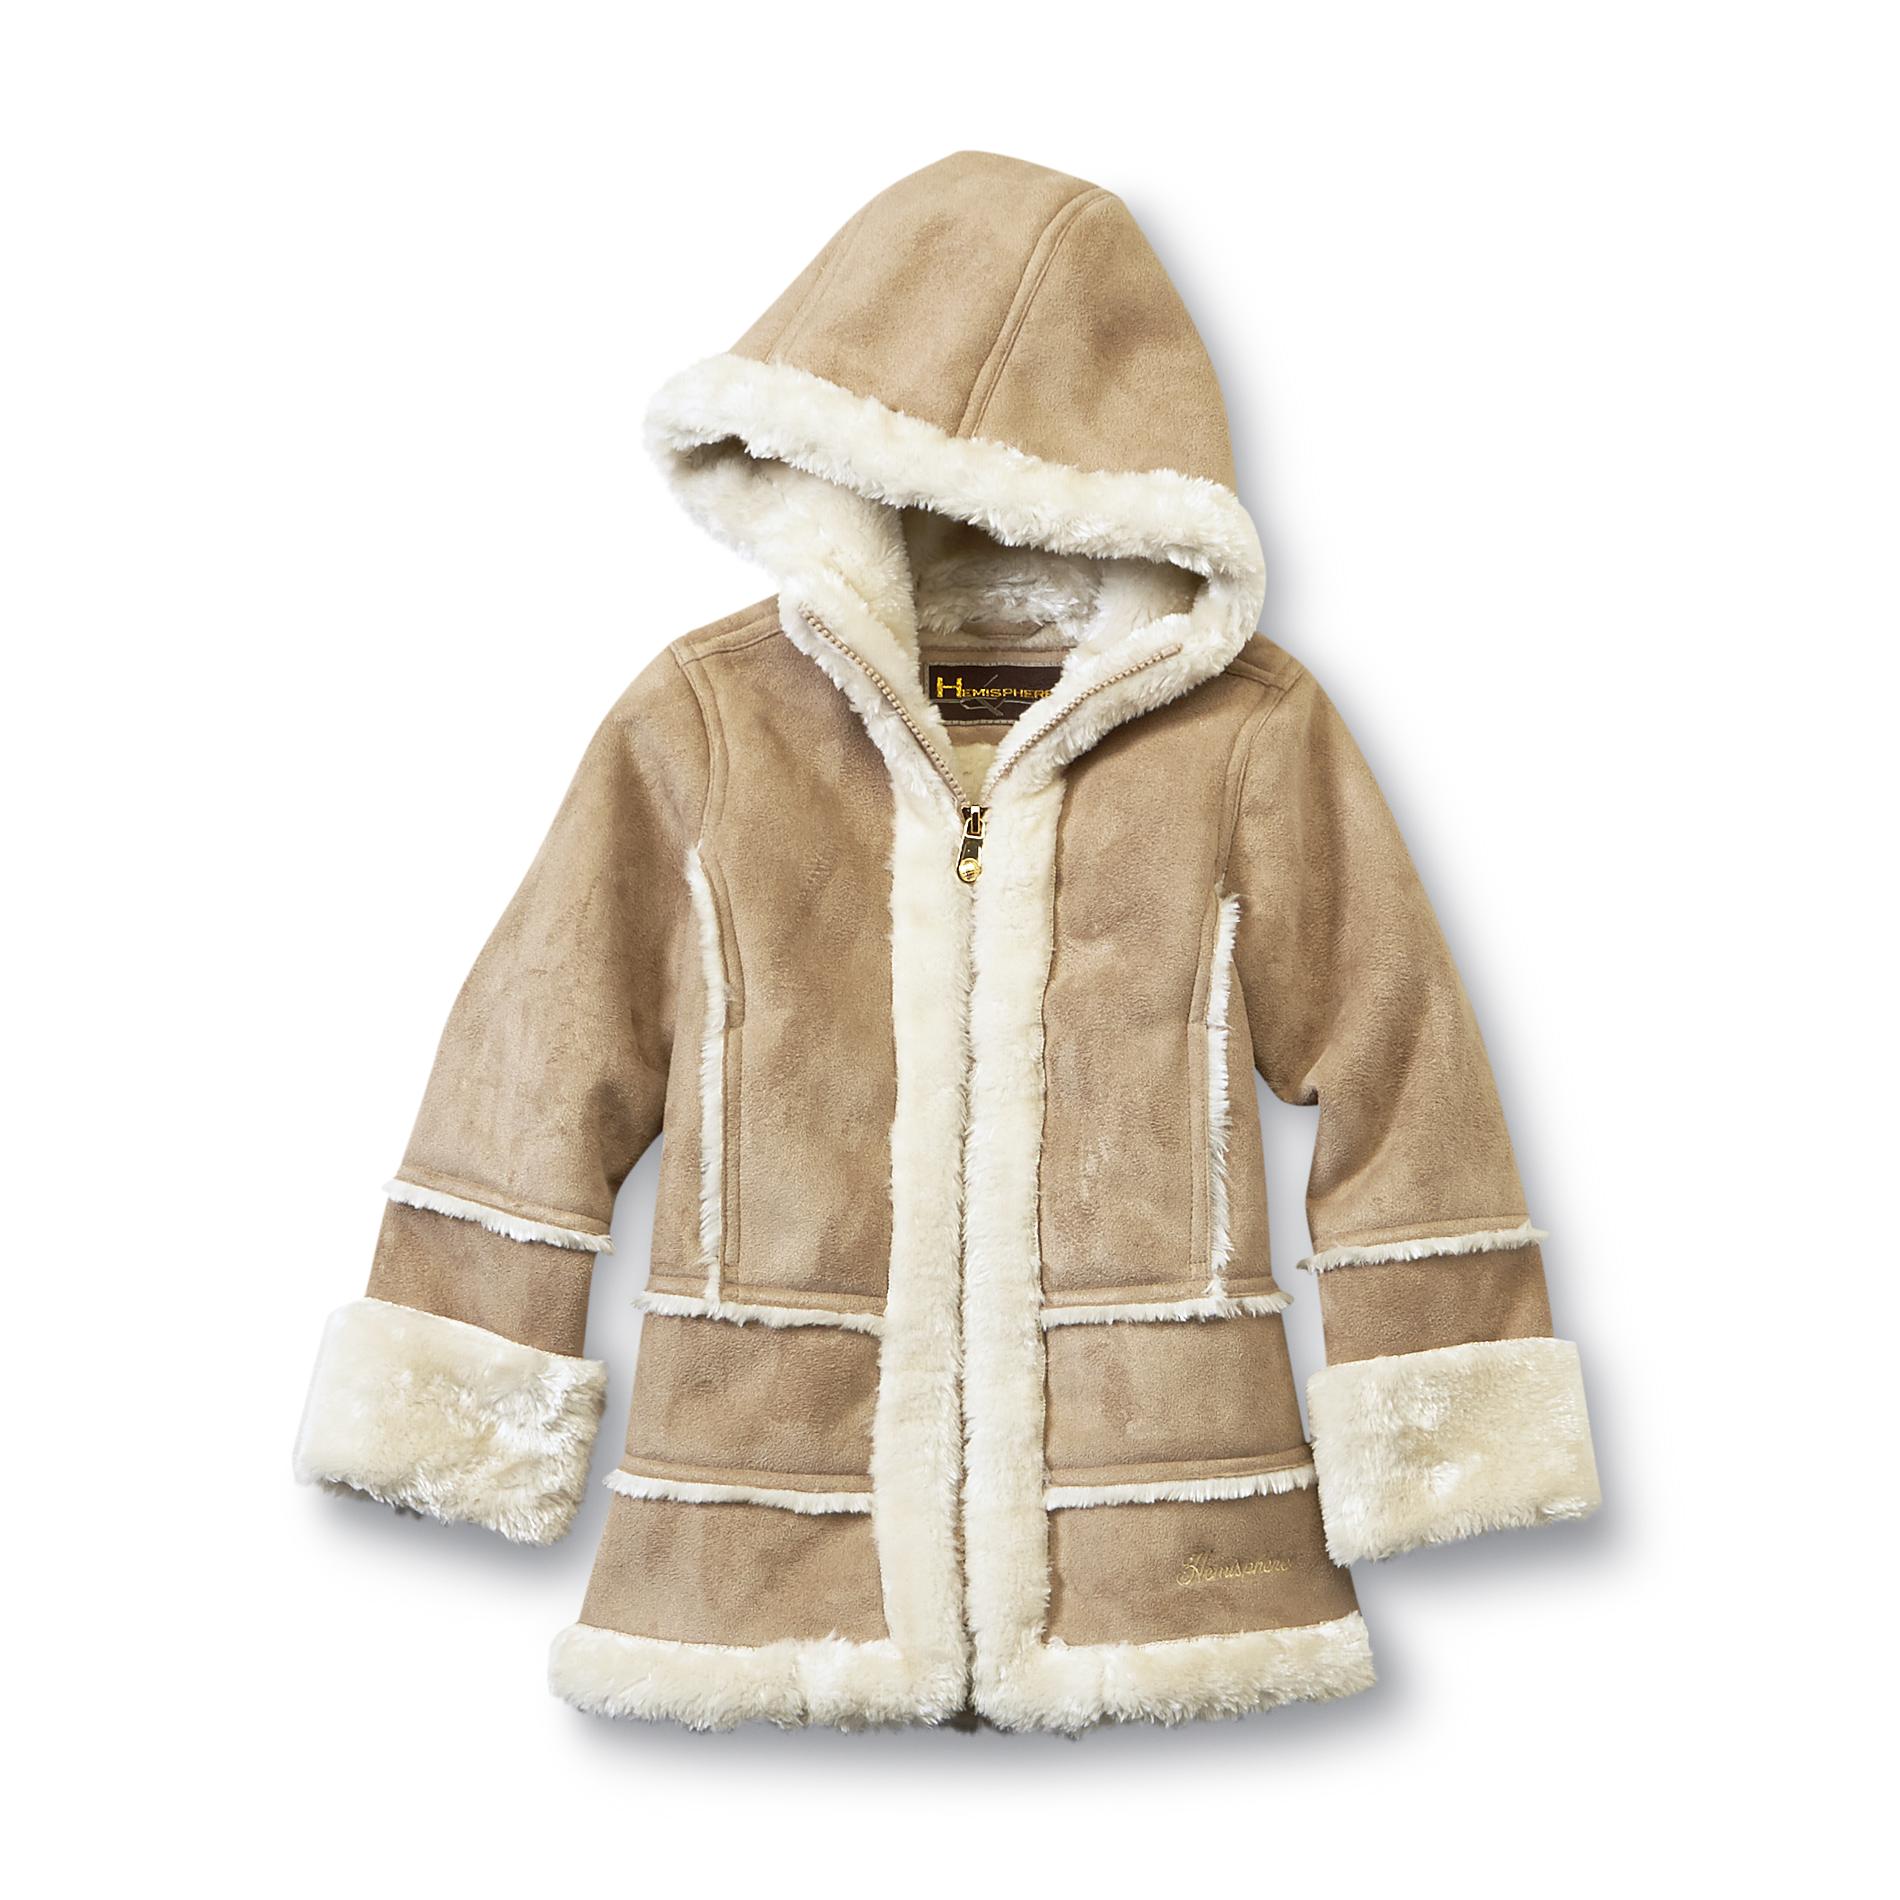 Hemisphere Toddler Girl's Synthetic Shearling Jacket